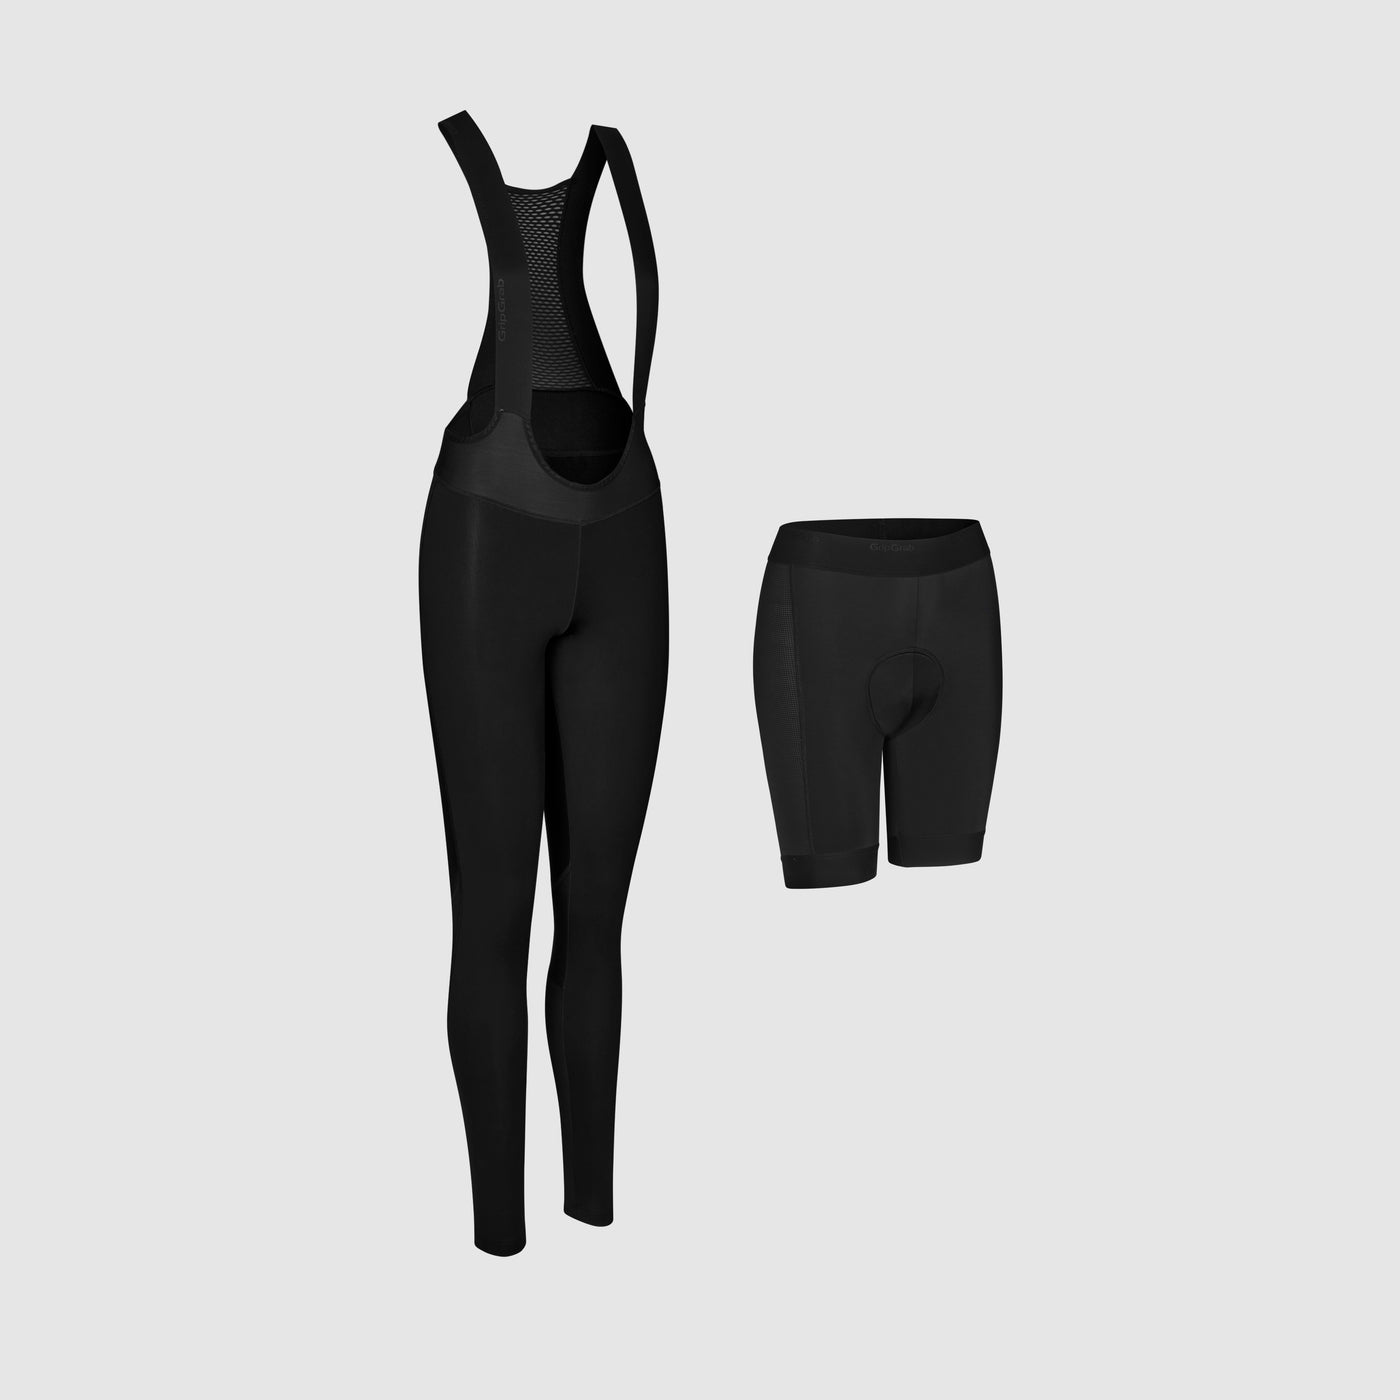 Women’s ThermaShell Water-Resistant Bib Tights